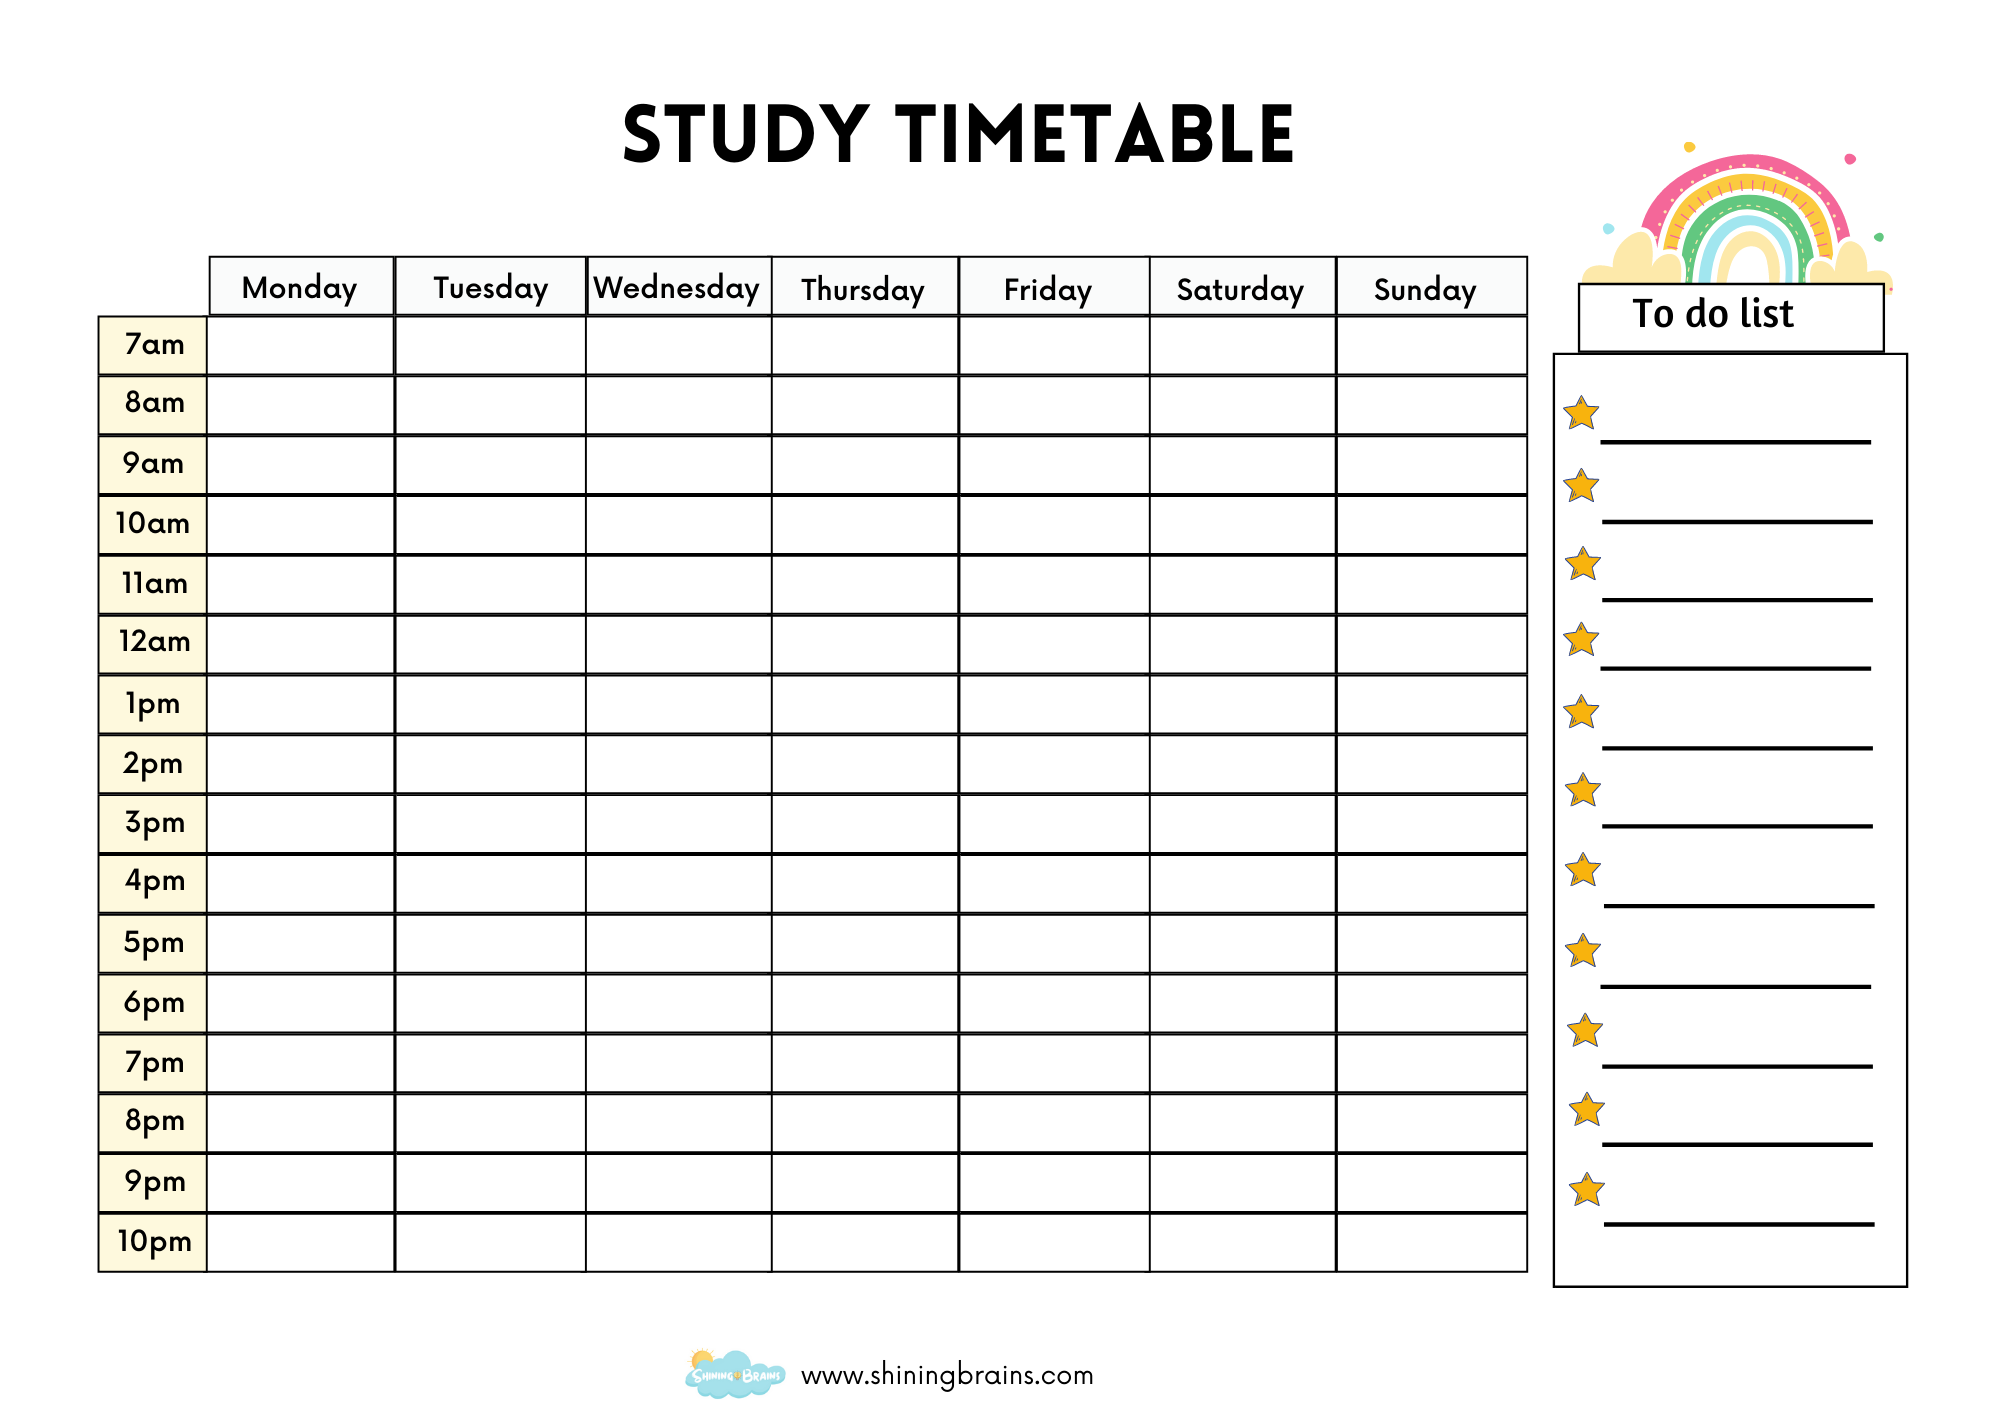 Study Timetable Template For Students Free Timetable Template Printable